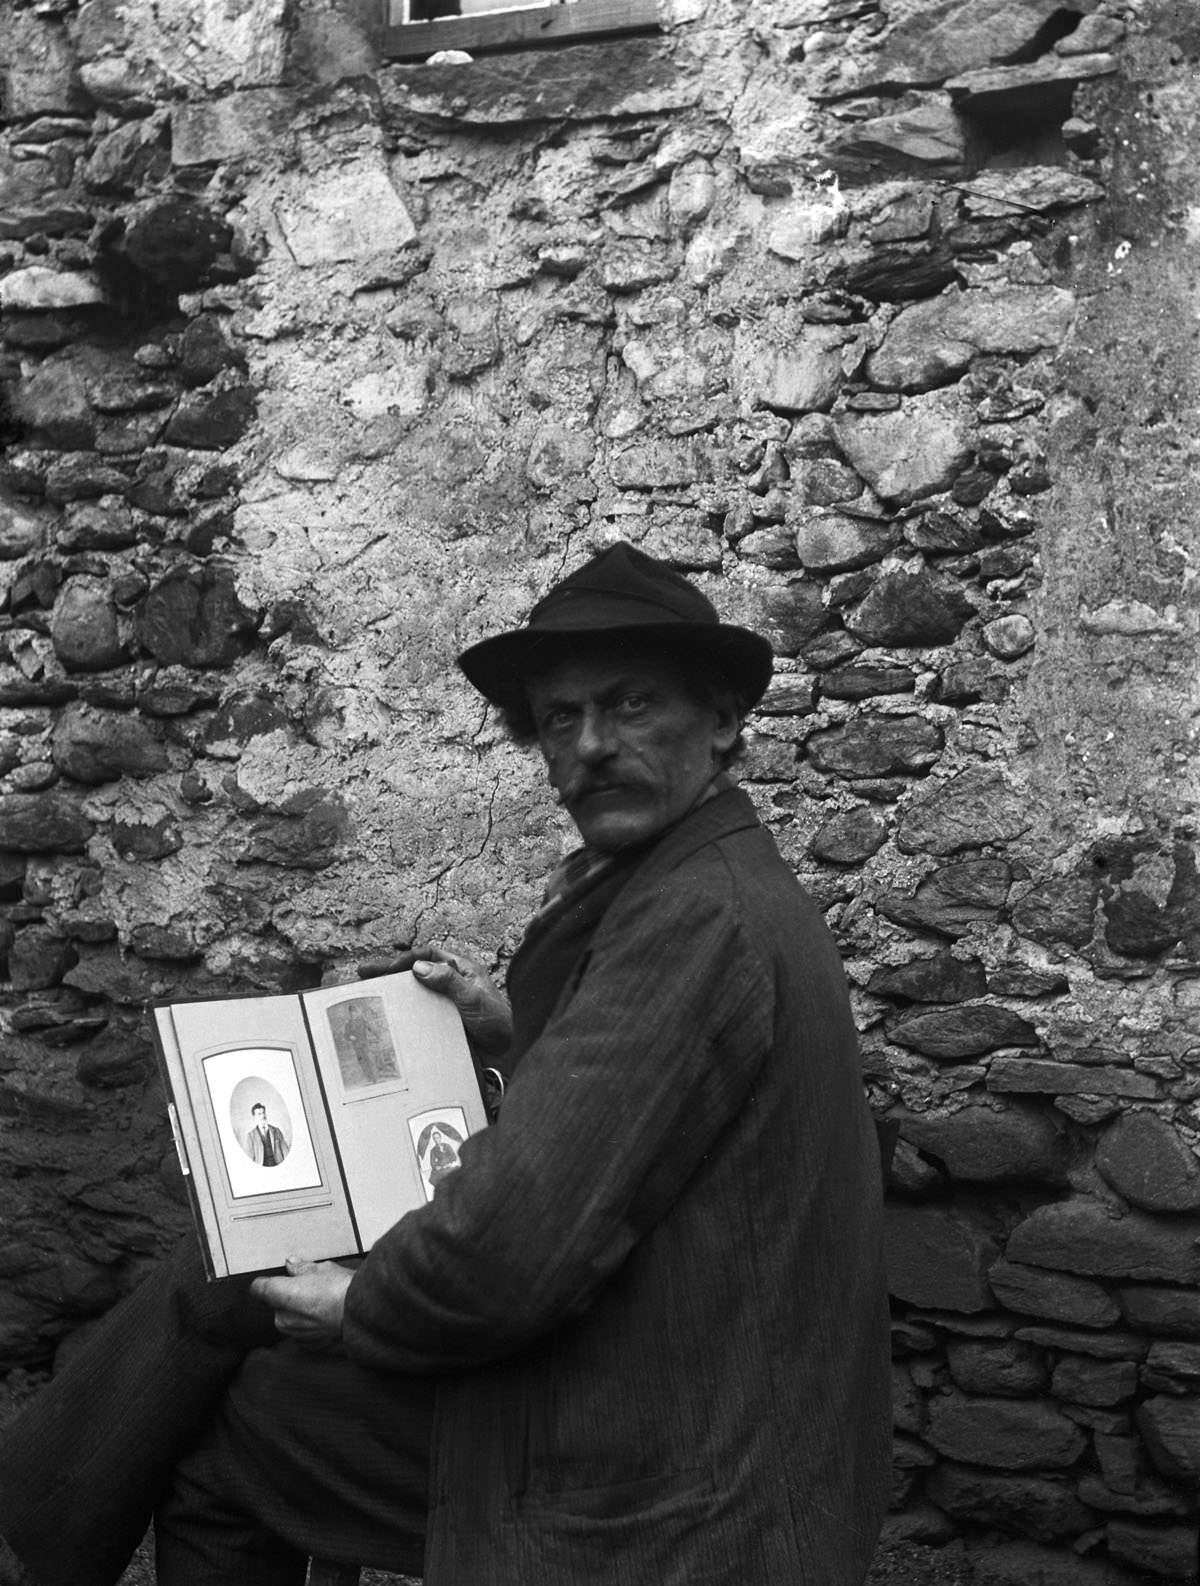 Self-portrait of Roberto Donetta with hat and a photo album in hand, in front of a wall, Bleniotal